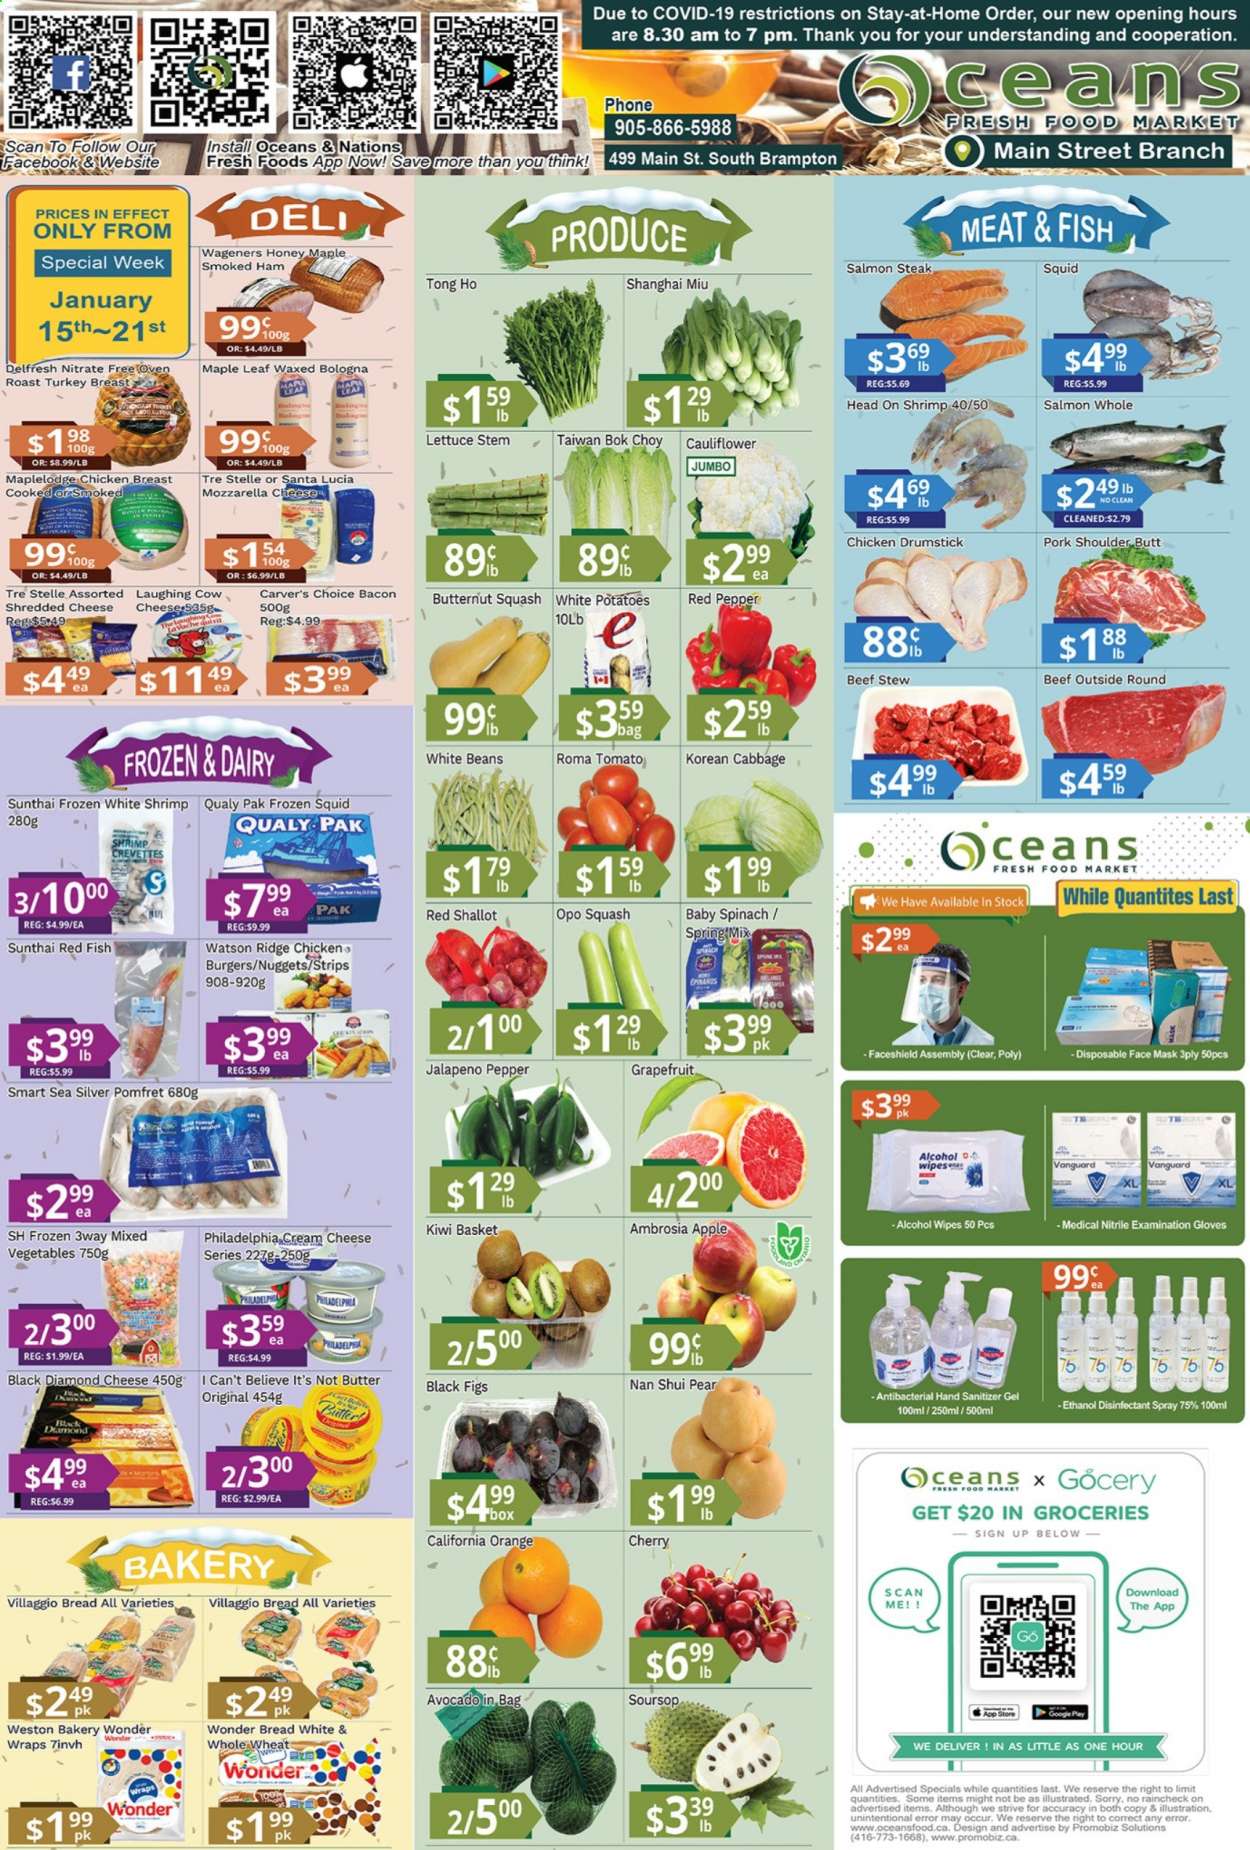 thumbnail - Oceans Flyer - January 15, 2021 - January 21, 2021 - Sales products - bread, wraps, beans, bok choy, butternut squash, cabbage, spinach, tomatoes, potatoes, lettuce, jalapeño, avocado, figs, grapefruits, pears, salmon, squid, fish, shrimps, nuggets, hamburger, bacon, ham, smoked ham, bologna sausage, shredded cheese, The Laughing Cow, I Can't Believe It's Not Butter, mixed vegetables, strips, Santa, honey, chicken breasts, chicken, turkey, pork meat, pork shoulder, wipes, face mask, antibacterial spray, hand sanitizer, gloves, kiwi, mozzarella, steak, desinfection. Page 1.